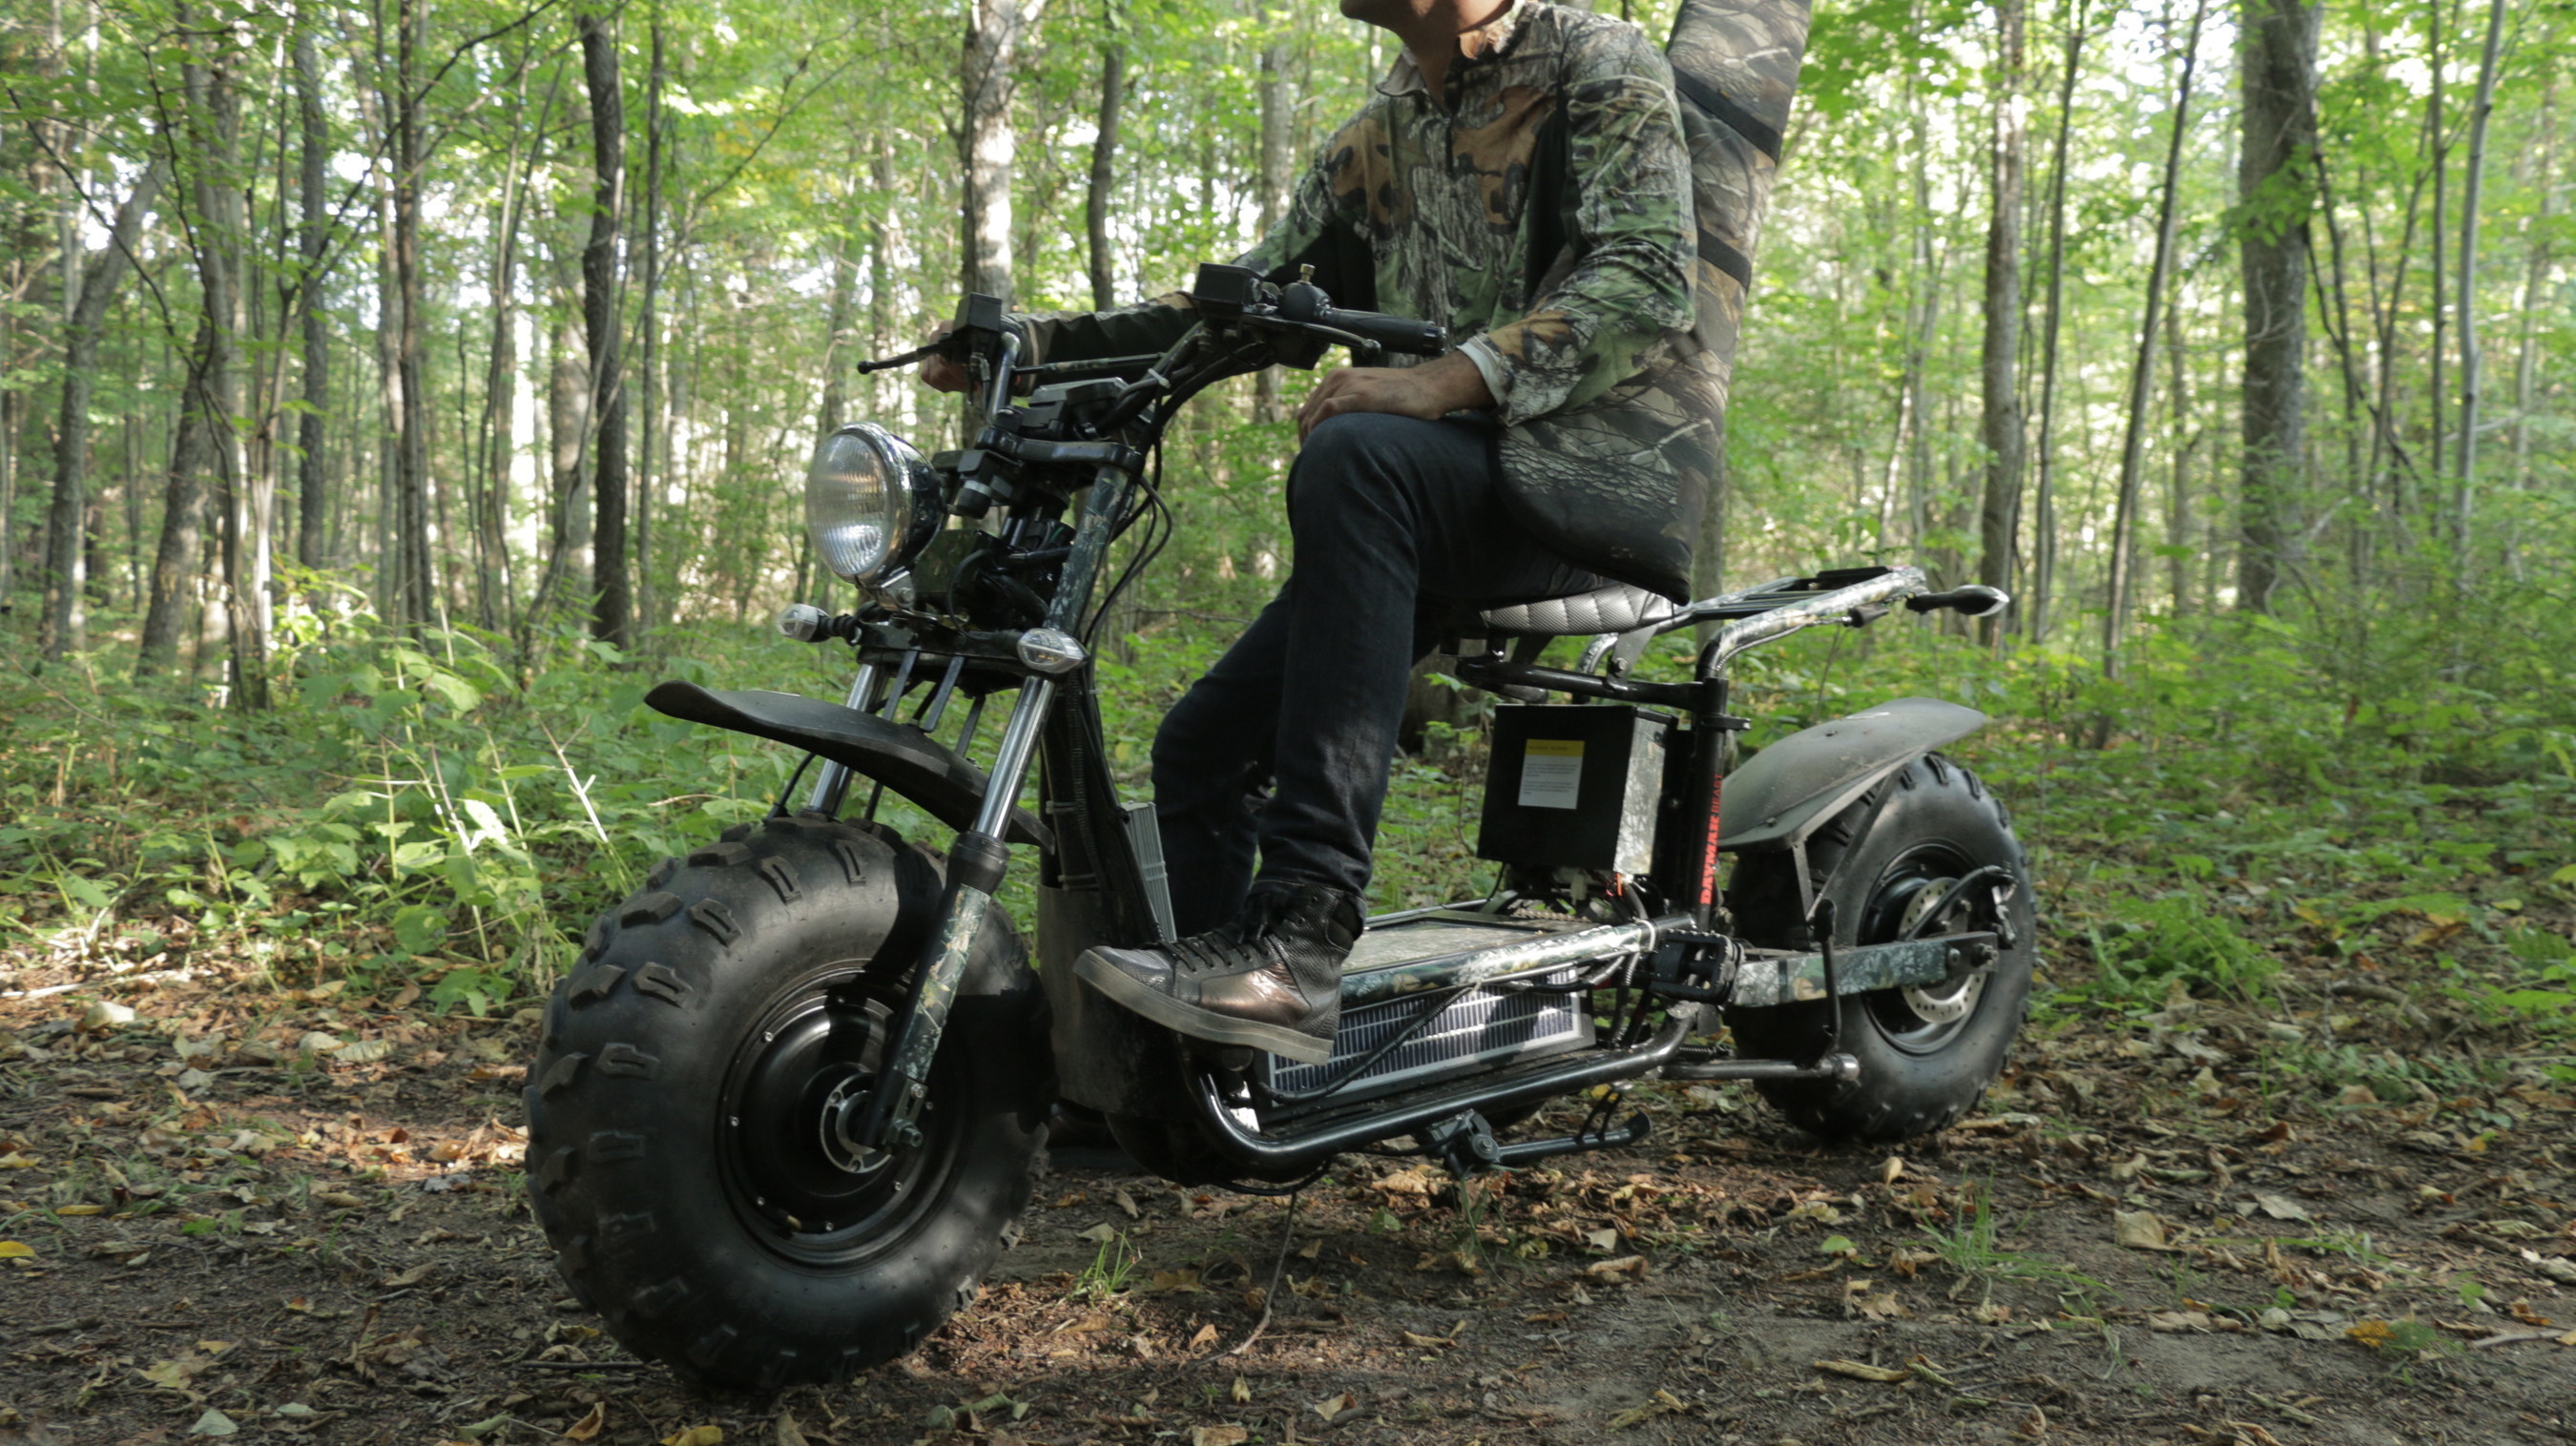 The Beast D is the silent off-road ATV